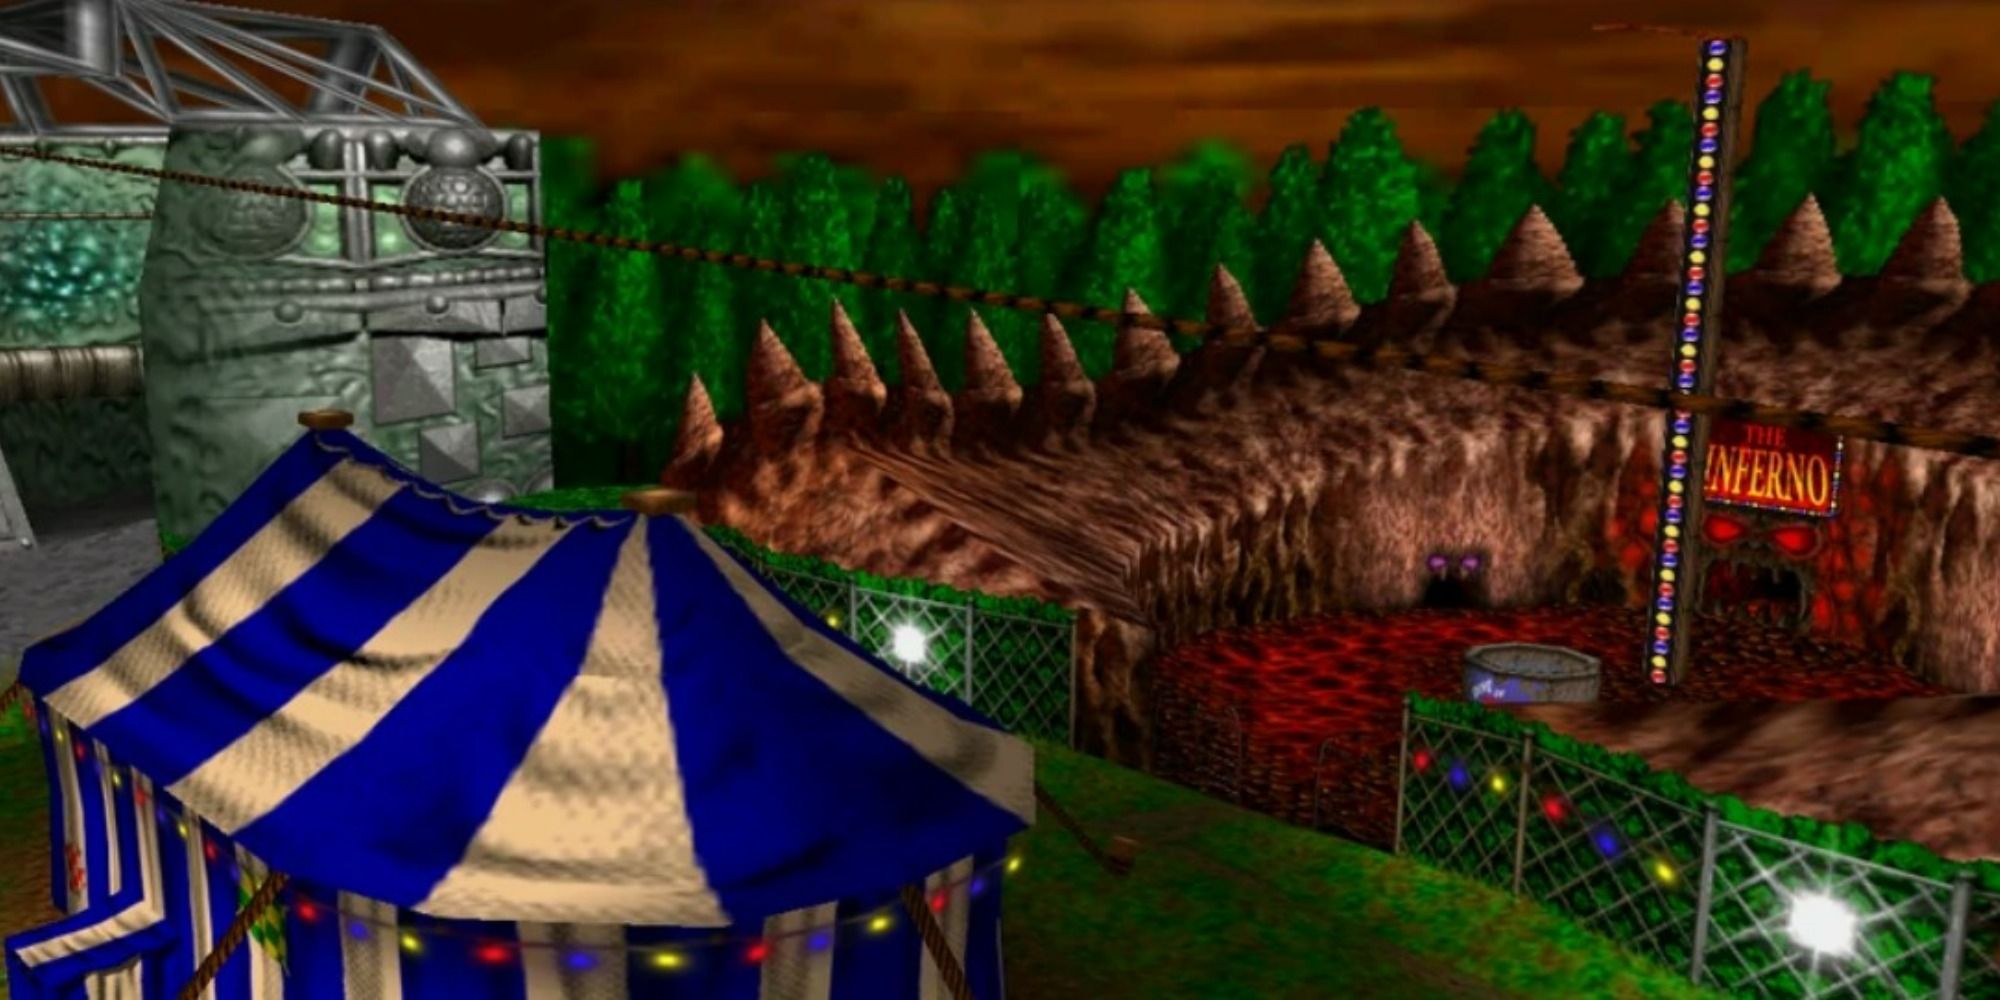 witchyworld location from banjo tooie featuring big top and inferno area in forest